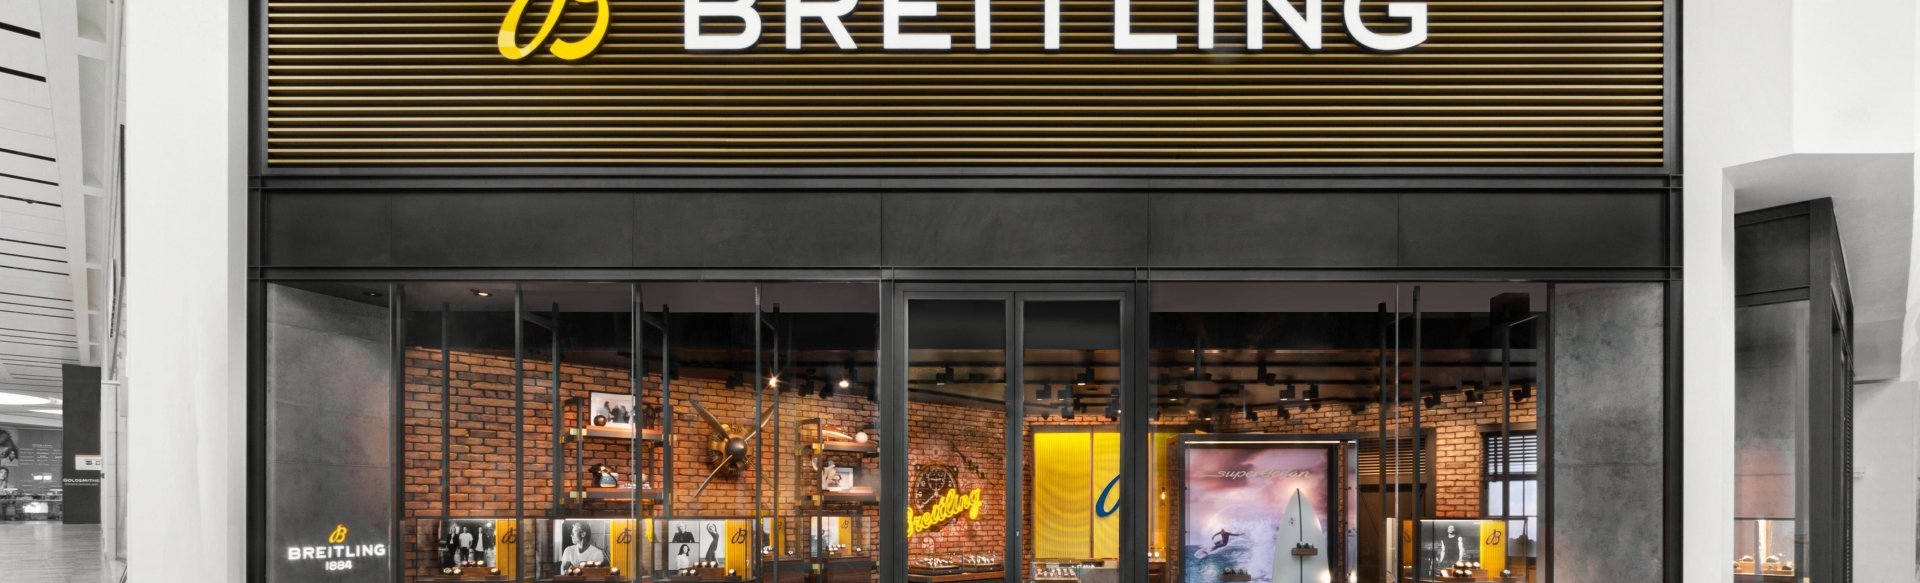 Breitling Boutique Meadowhall